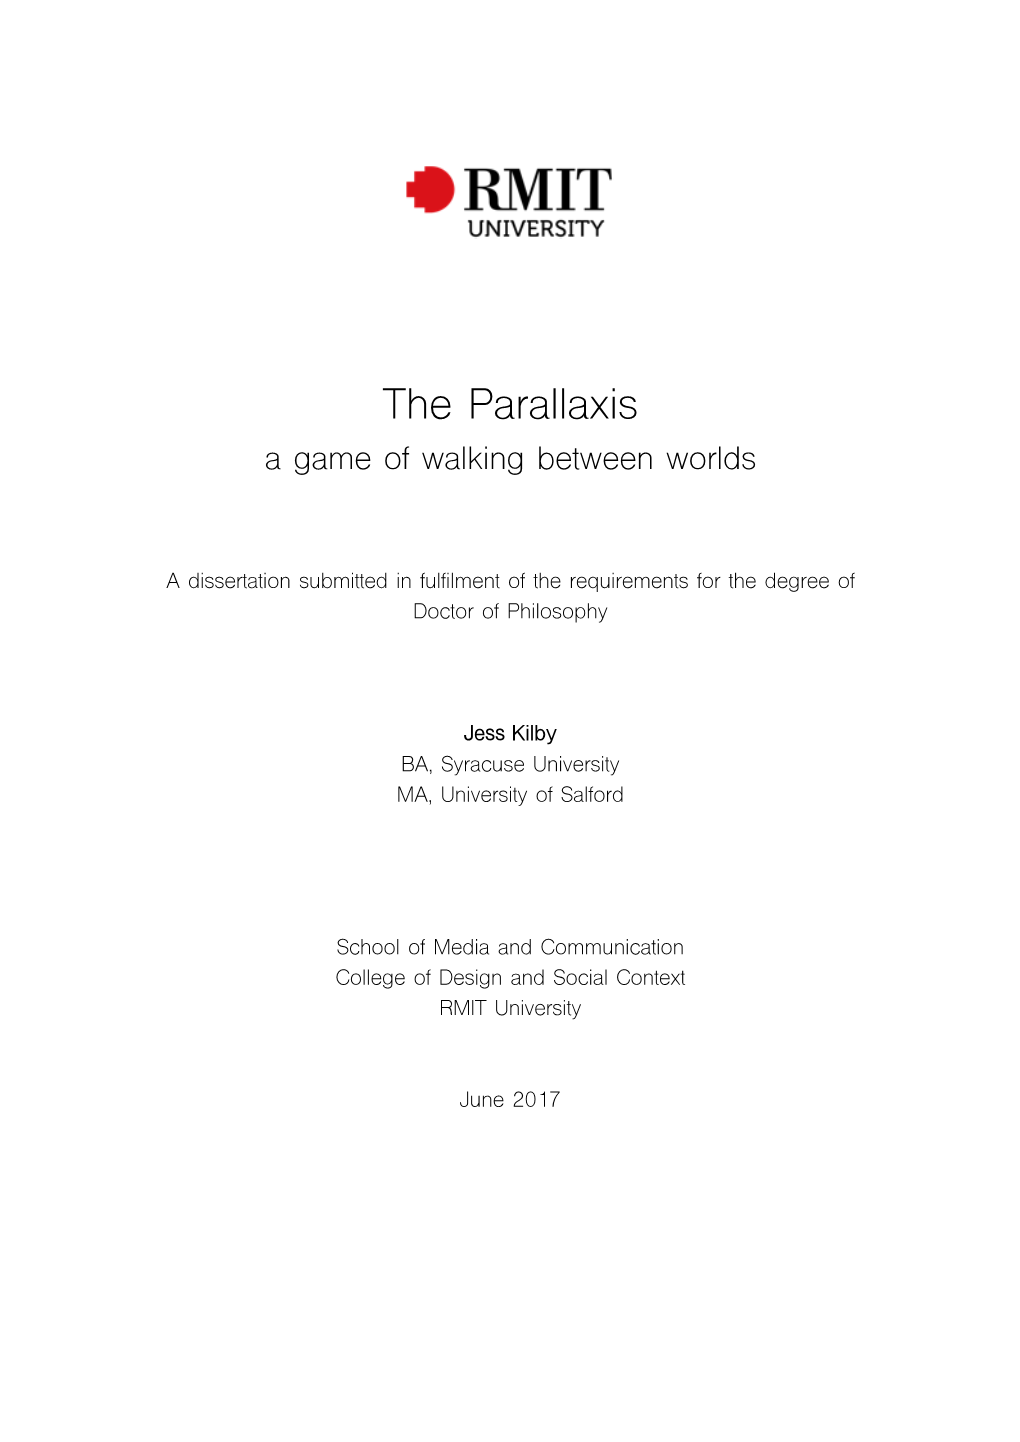 The Parallaxis a Game of Walking Between Worlds